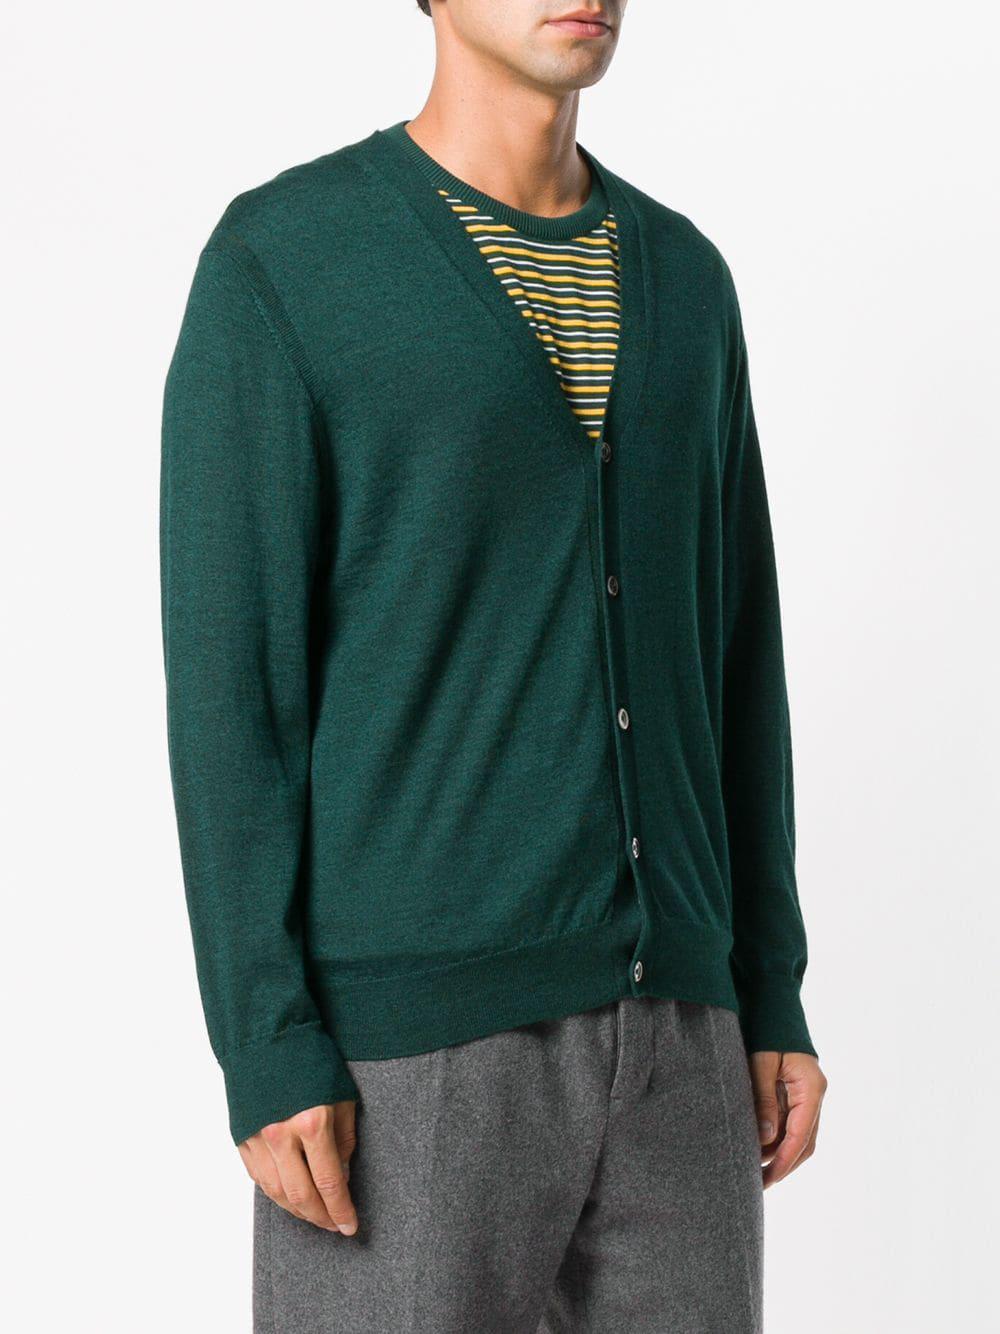 N.Peal Cashmere Cashmere Cardigan in Green for Men - Lyst